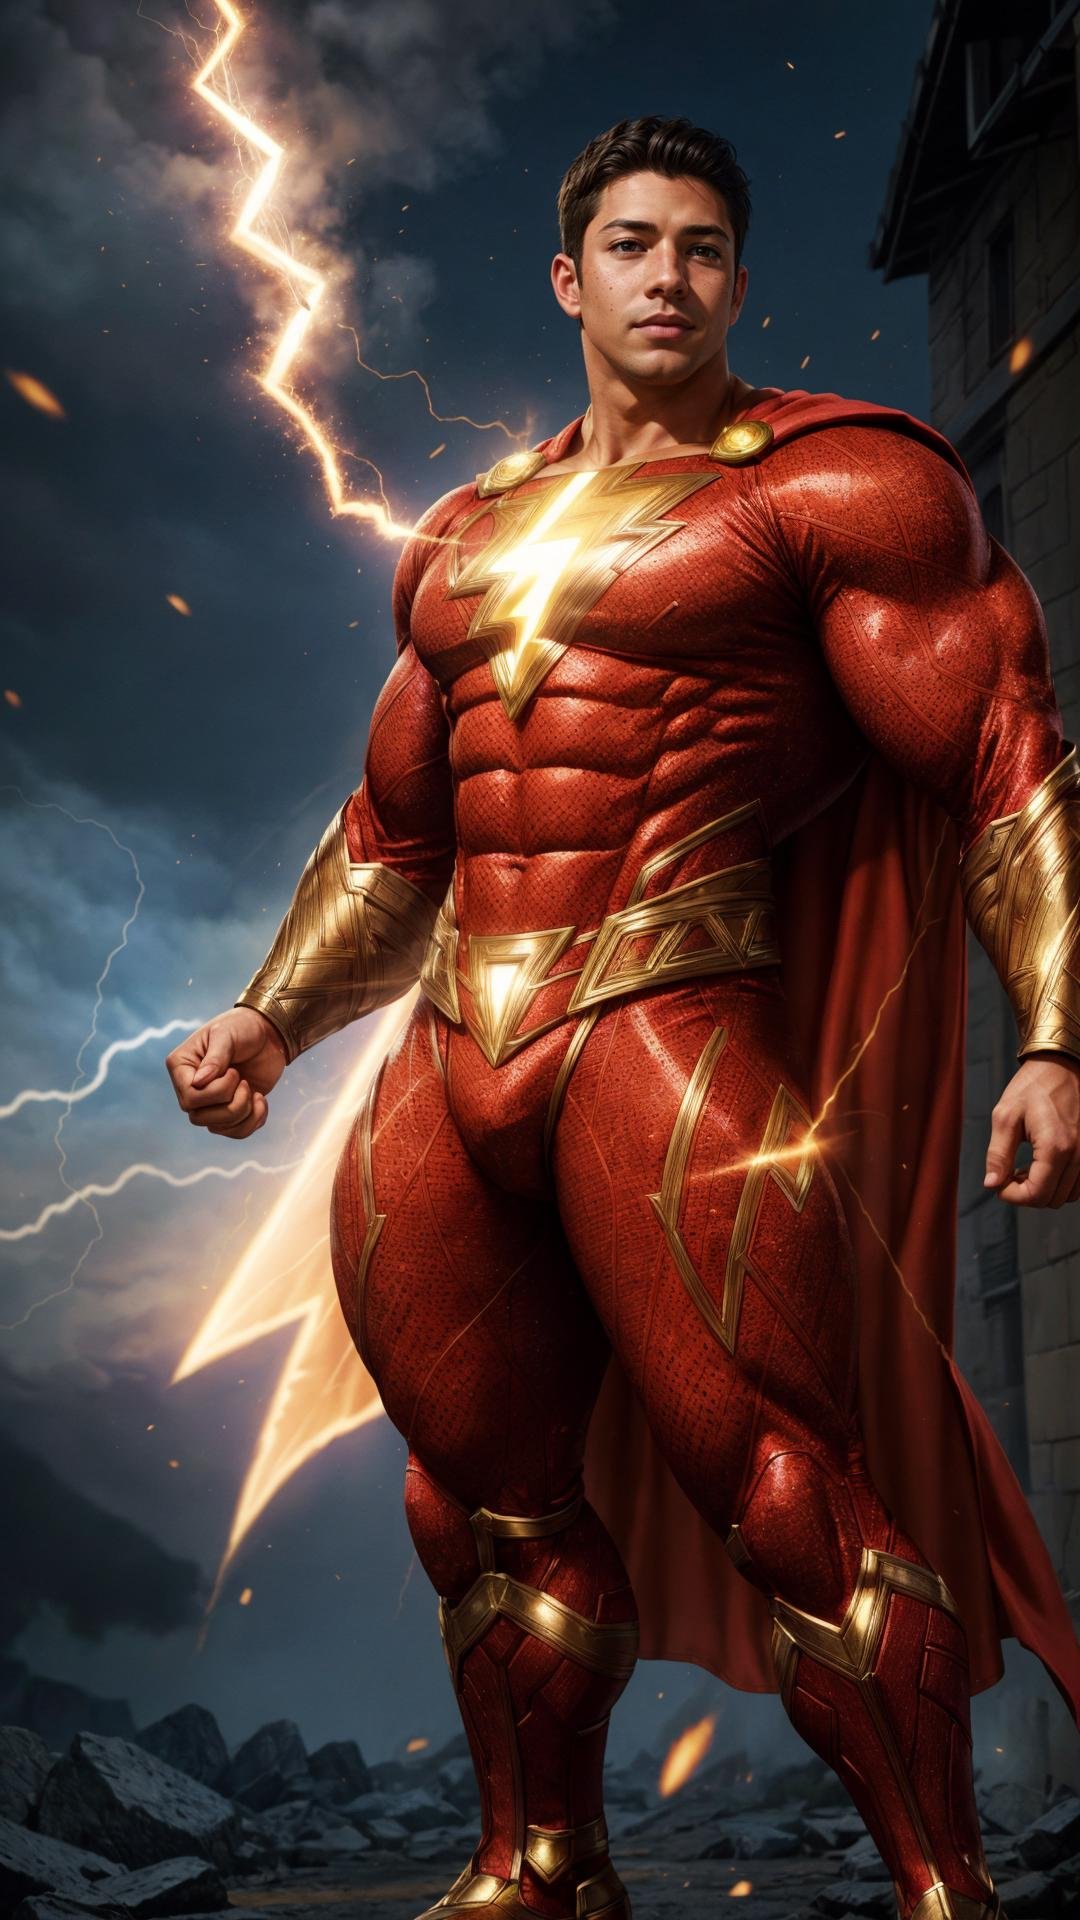 (GS-Masculine:1), (1boy), hero pose, tan glowing skin, freckles, depth of field, dynamic angles, <lora:more_details:0.5>, <lora:Shazamsuit_Lora_v1:0.3>, shazamsuit, cape, electricity power flowing through his body, unbridled strength and power ready to be released